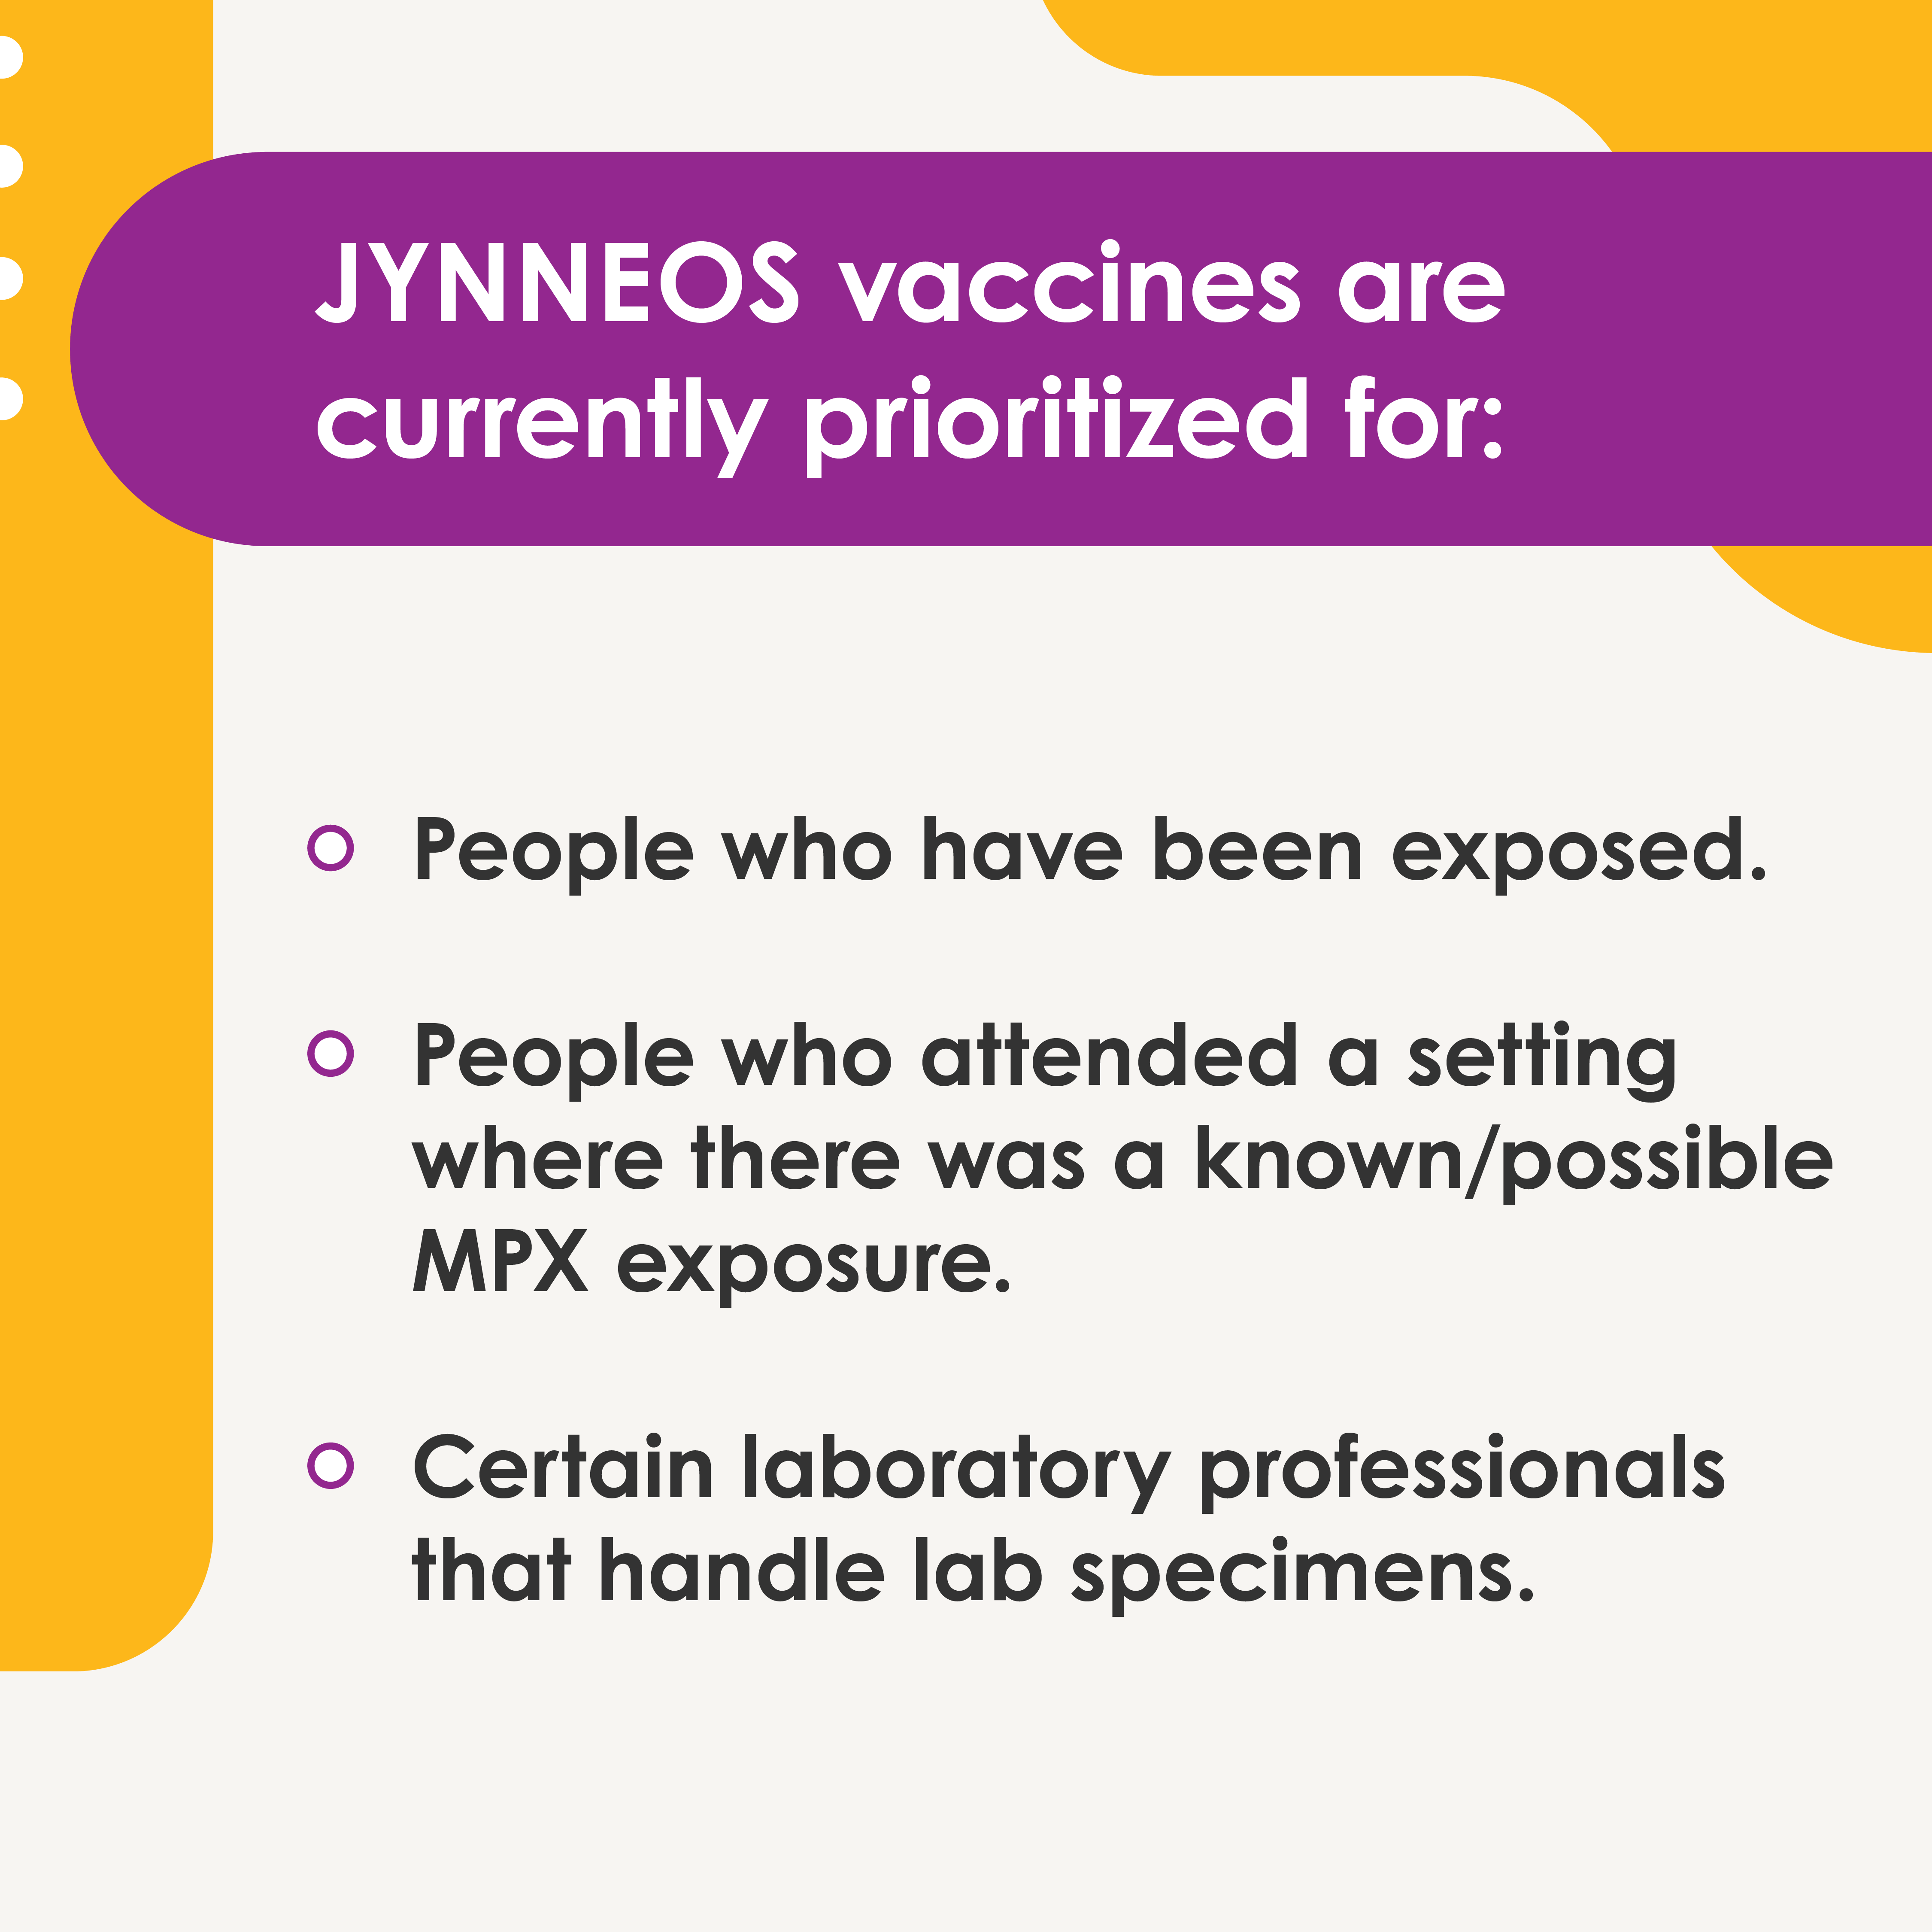 Jynneos vaccines are currently prioritized for people who have been exposed